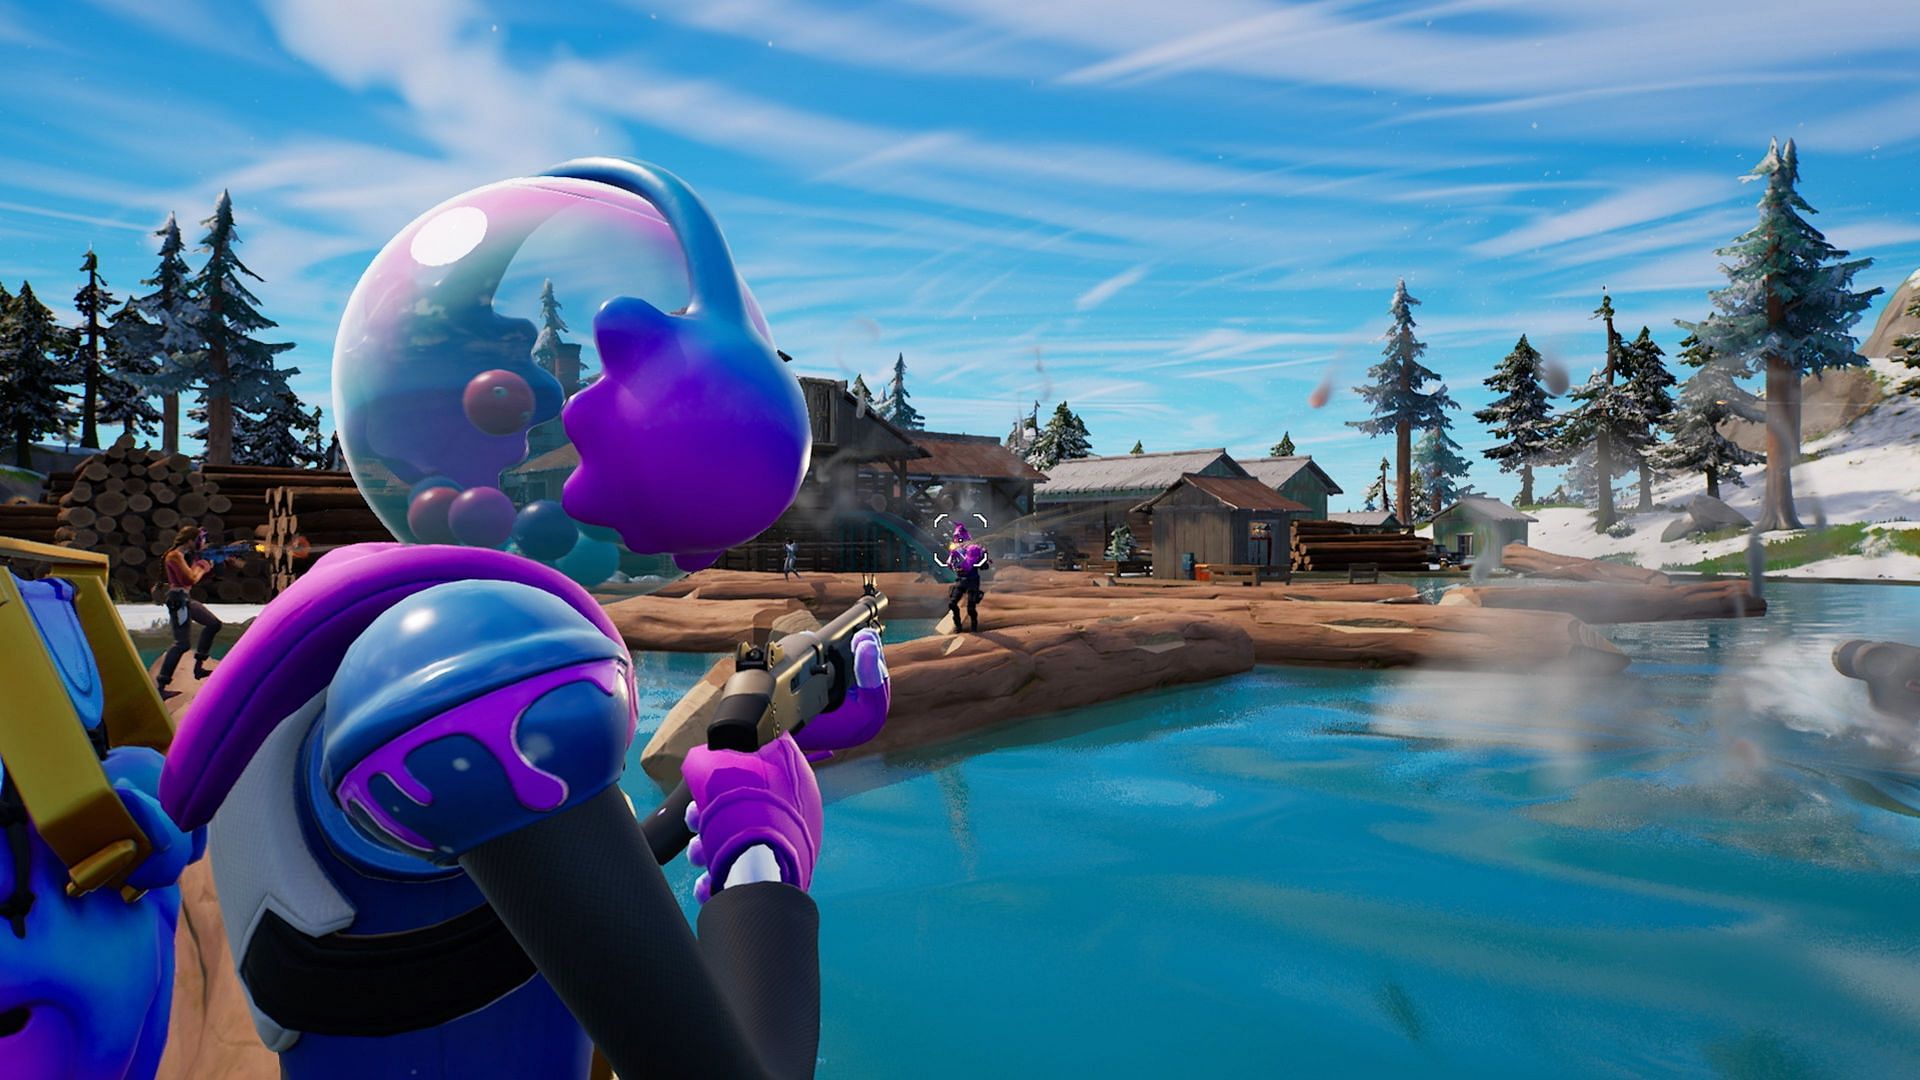 Trading accounts will lead to a ban from Epic Games (Image via Fortnite News/Twitter)